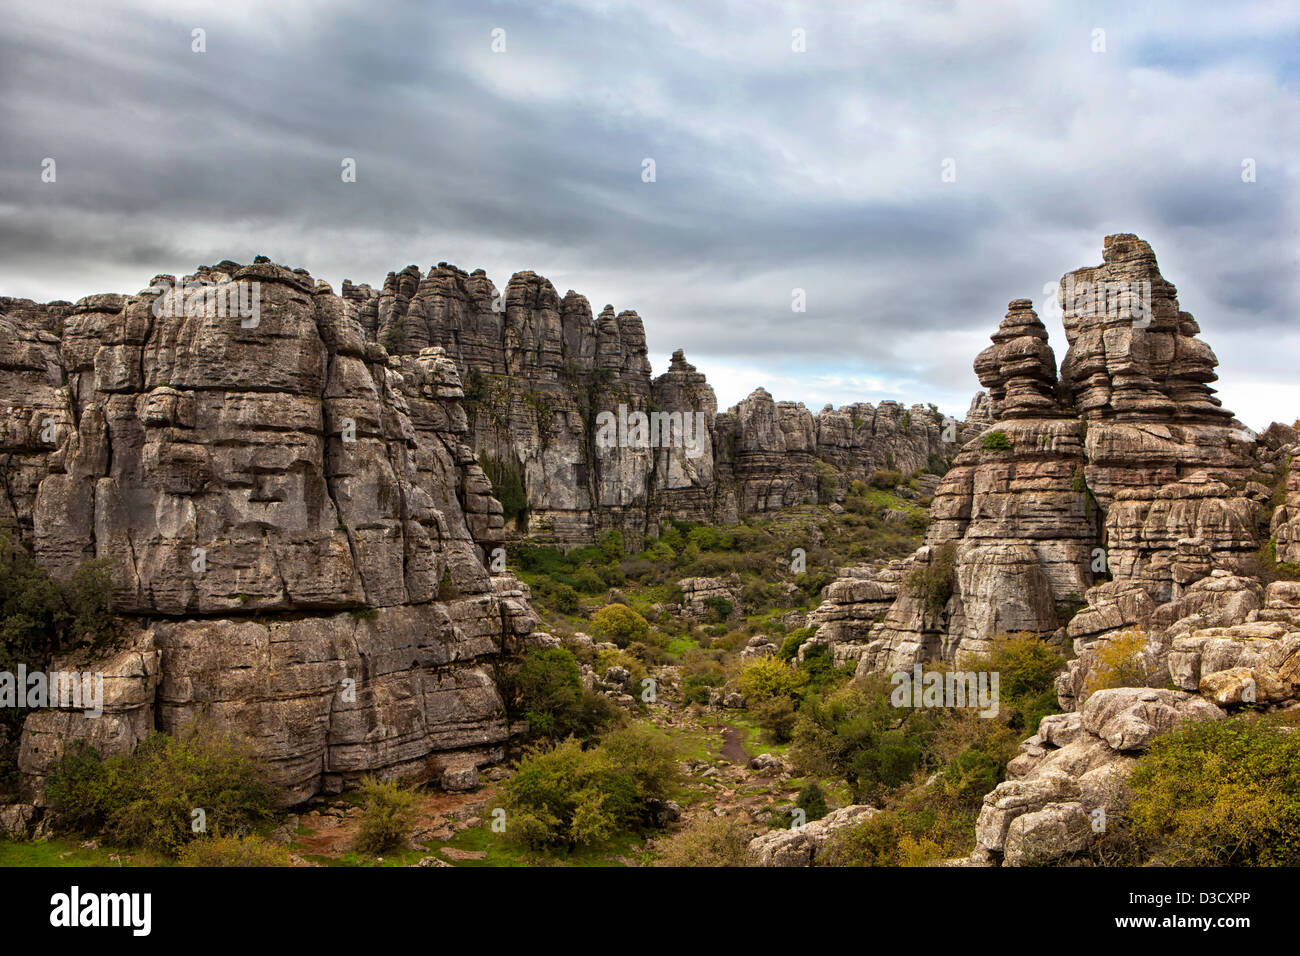 Rock formations  in the Torcal de Antequera, a nature reserve in Malaga, Spain Stock Photo